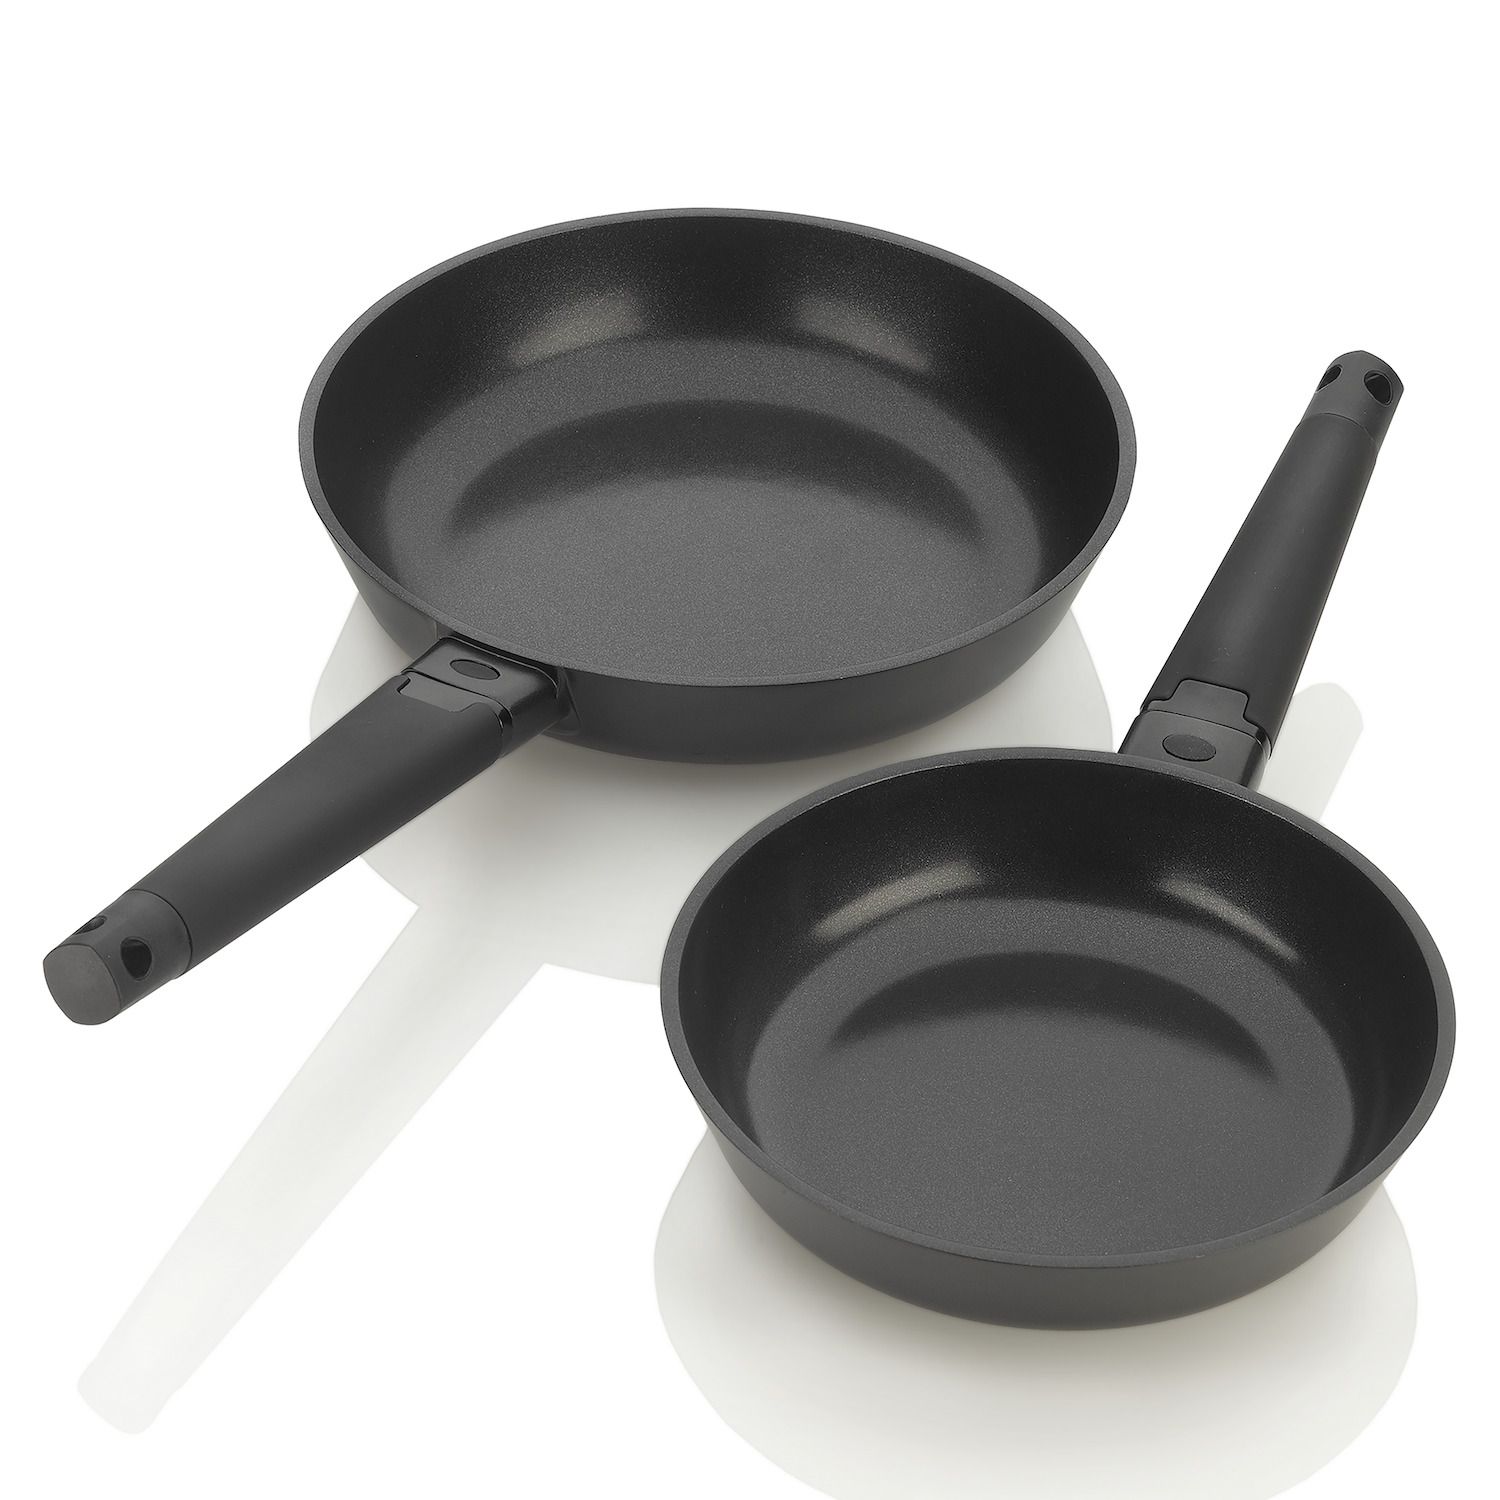  Wolfgang Puck 3-Piece Stainless Steel Skillet Set,  Scratch-Resistant Non-Stick Coating, Includes a Large and Small Skillet,  Clear Tempered-Glass Lid, Cool Touch Handles, Extra-Wide Rims: Home &  Kitchen